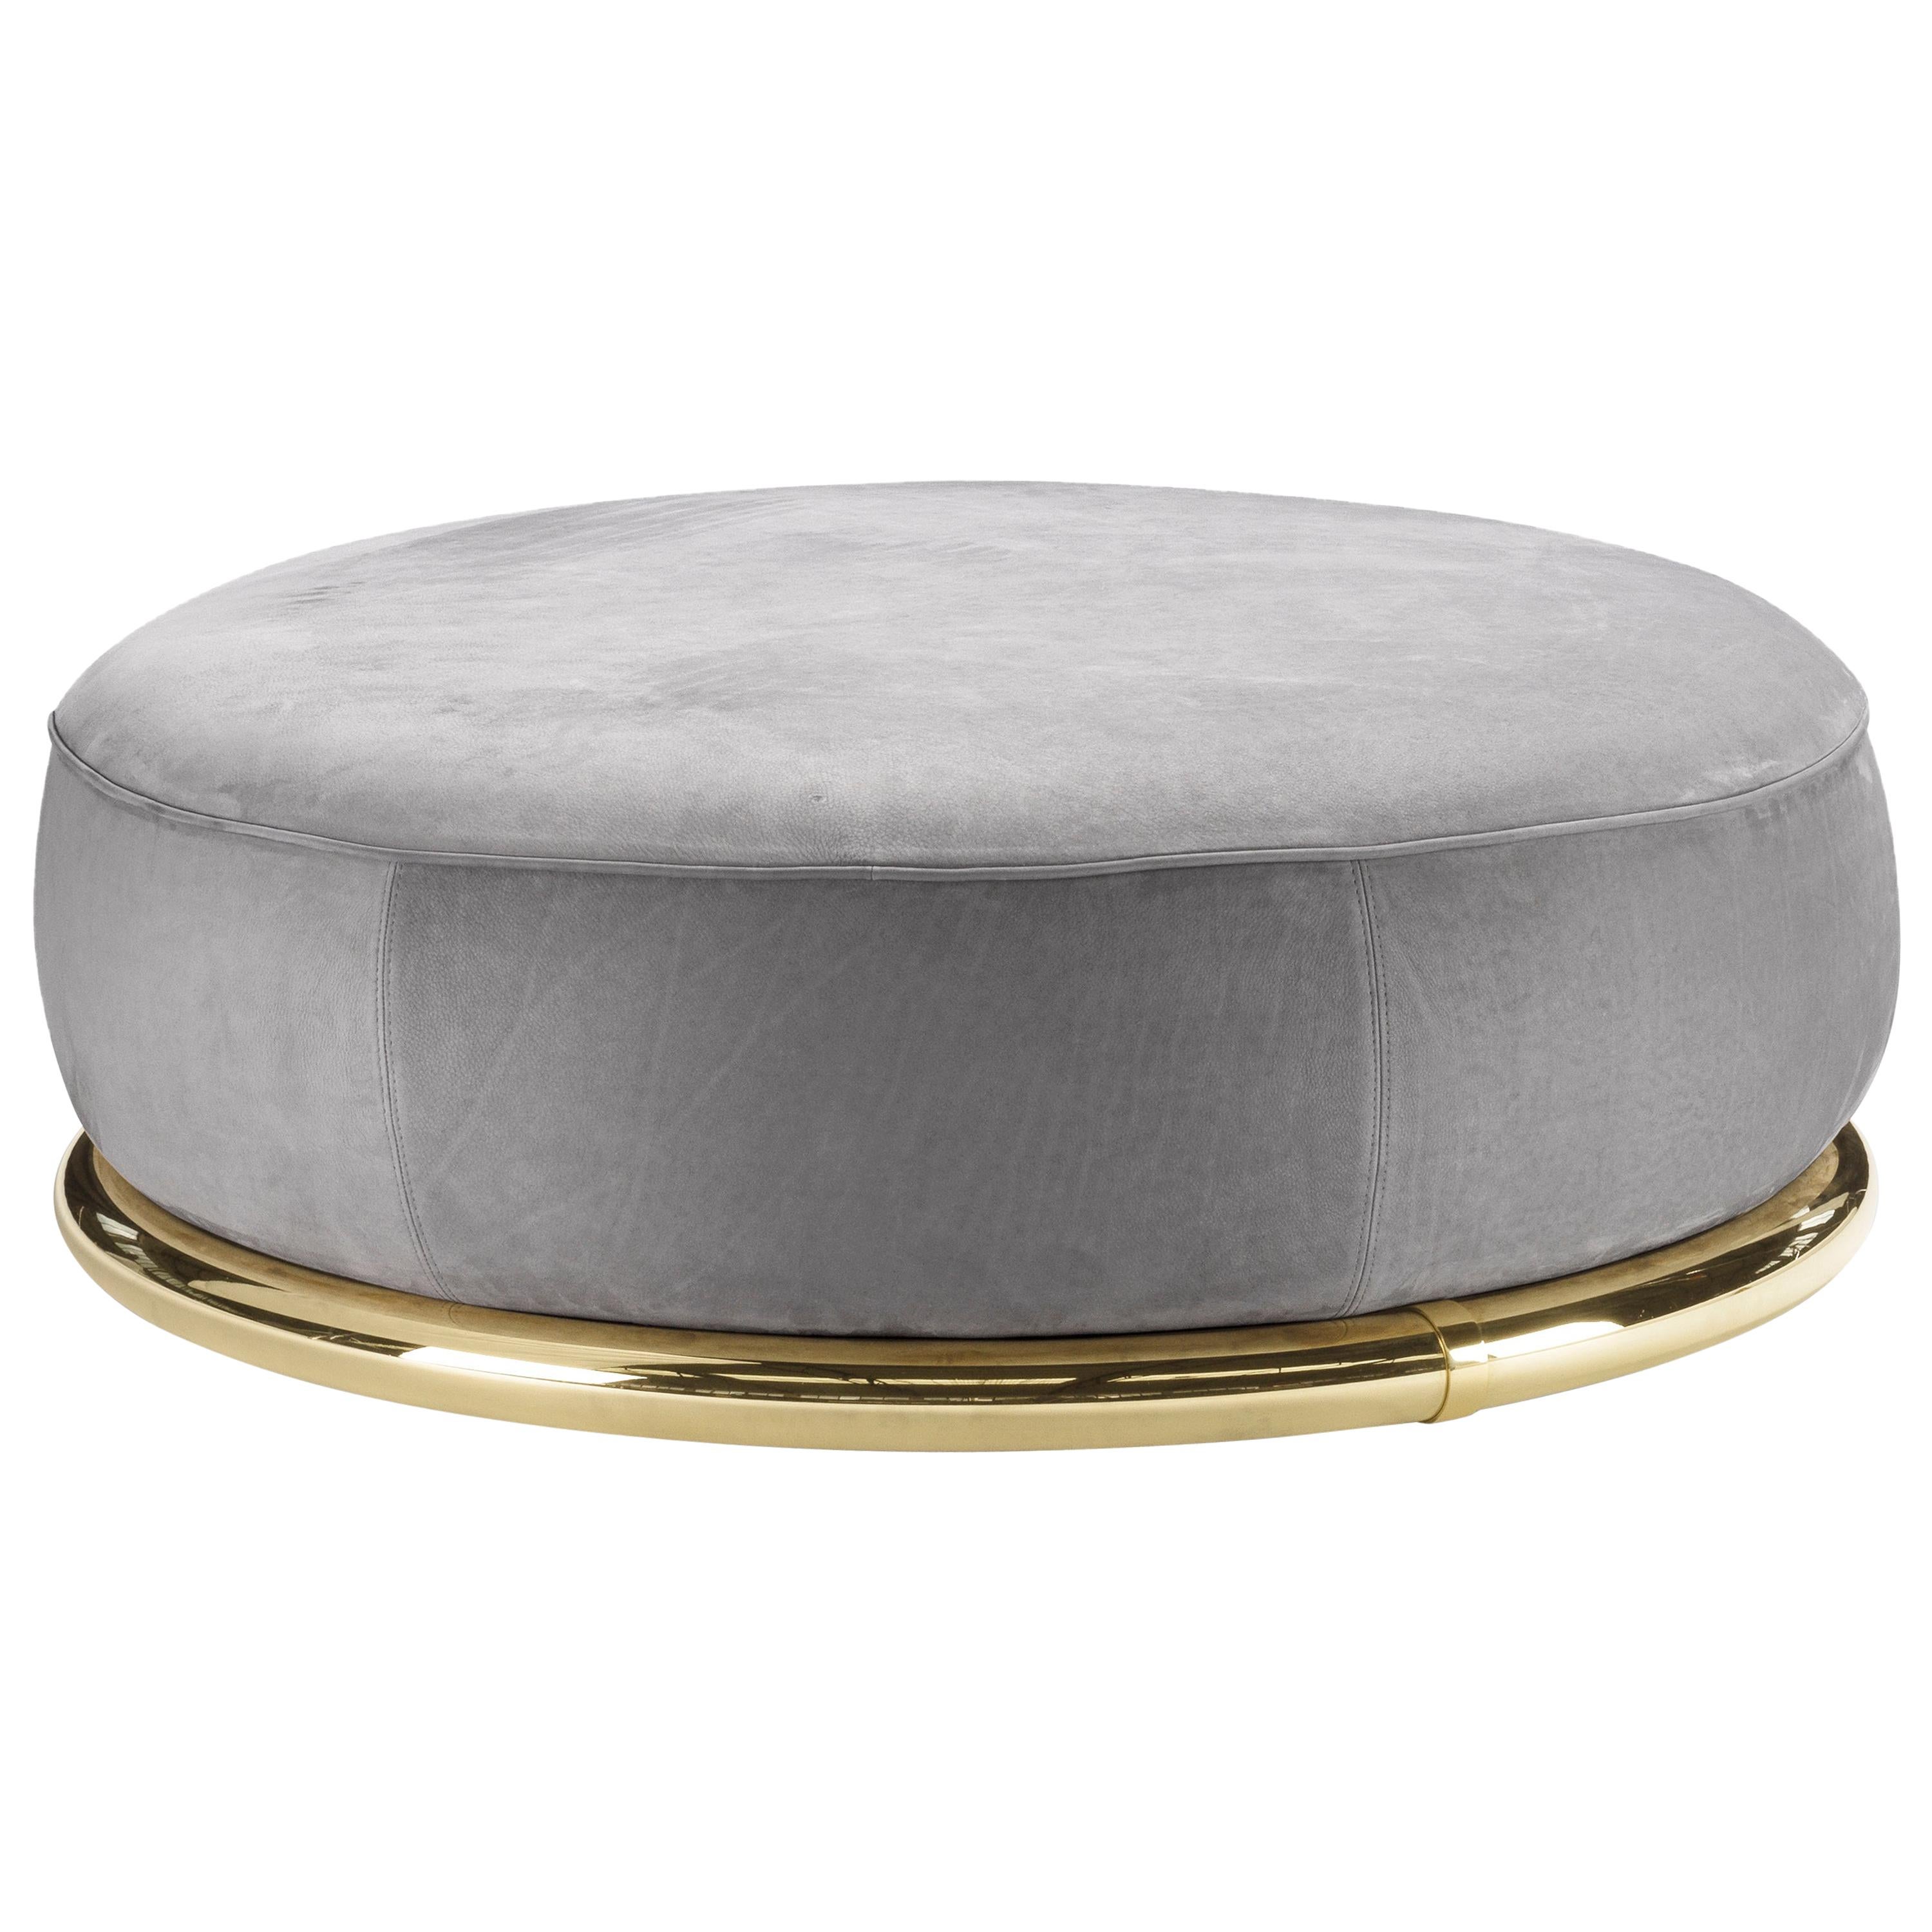 Ghidini 1961 Abbracci Small Ottoman in Grey Leather and Brass Base by L. Bozzoli For Sale